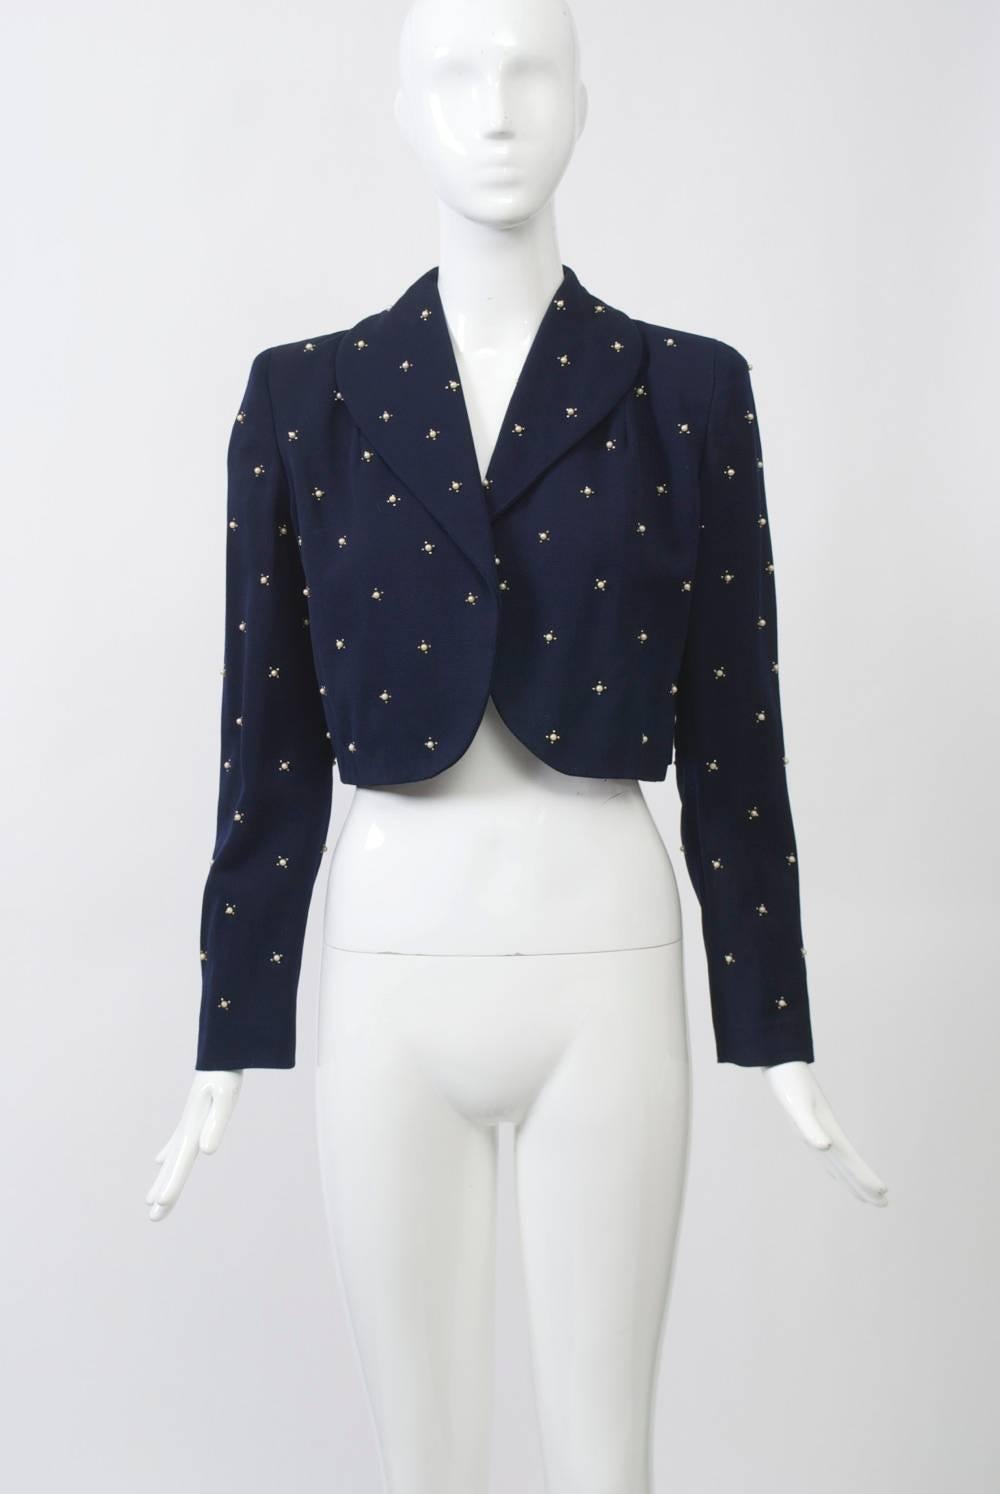 Cropped jacket in navy blue wool studded throughout with pearls and featuring a short shawl collar and curved front. Set-in narrow sleeves. Navy crepe lining. Approximate size 6.